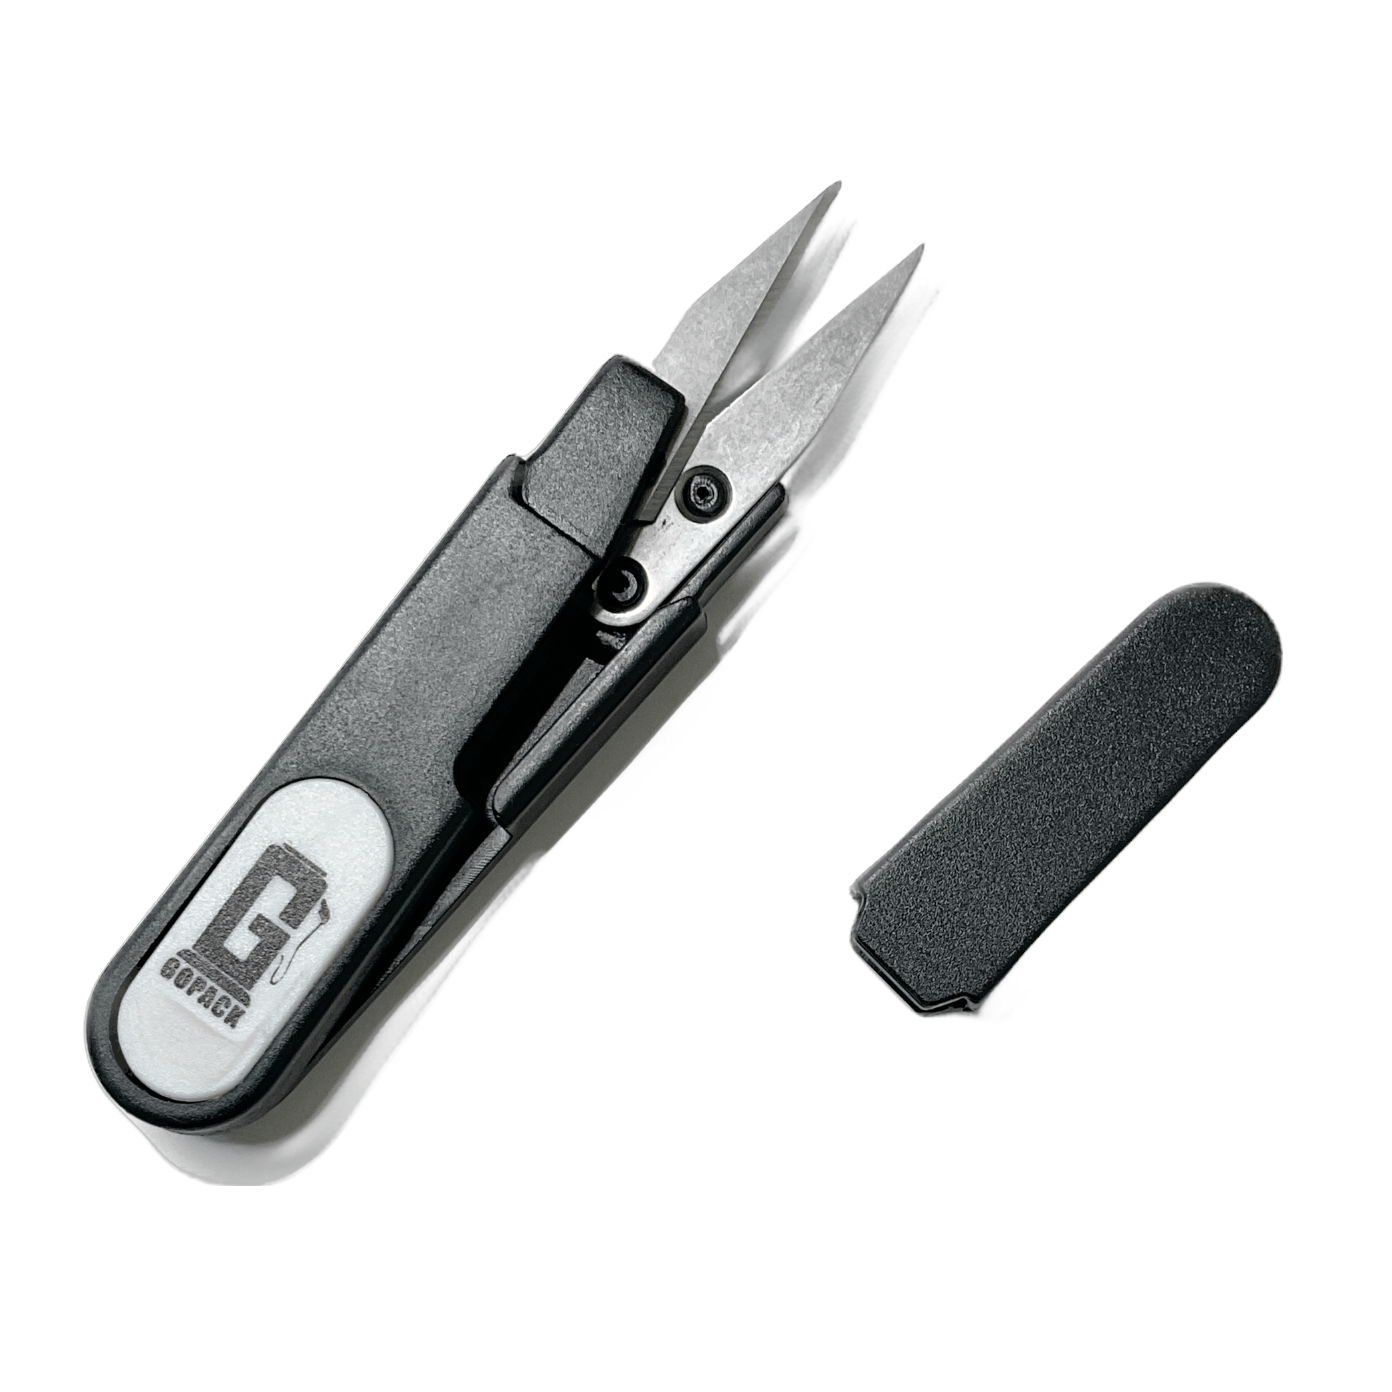 High-quality Gopack trimming scissors with protective cap, designed for precise and efficient trimming to enhance the smoking experience